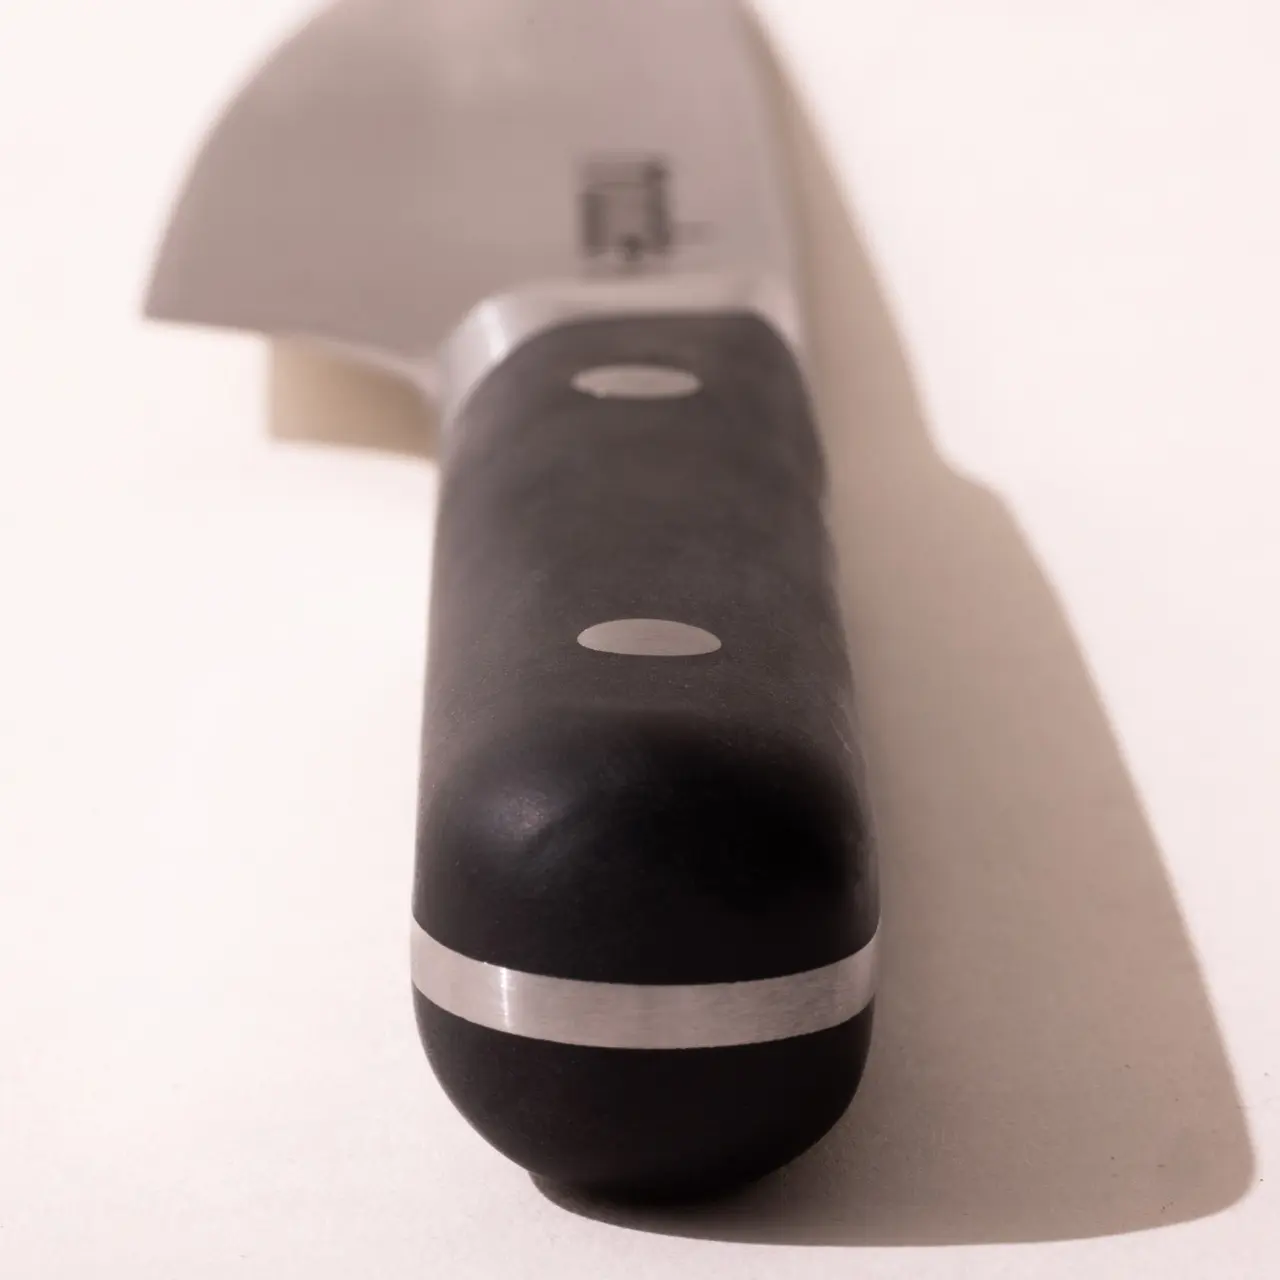 A close-up of a chef's knife with a black handle and three rivets, partially casting a shadow on a light surface.